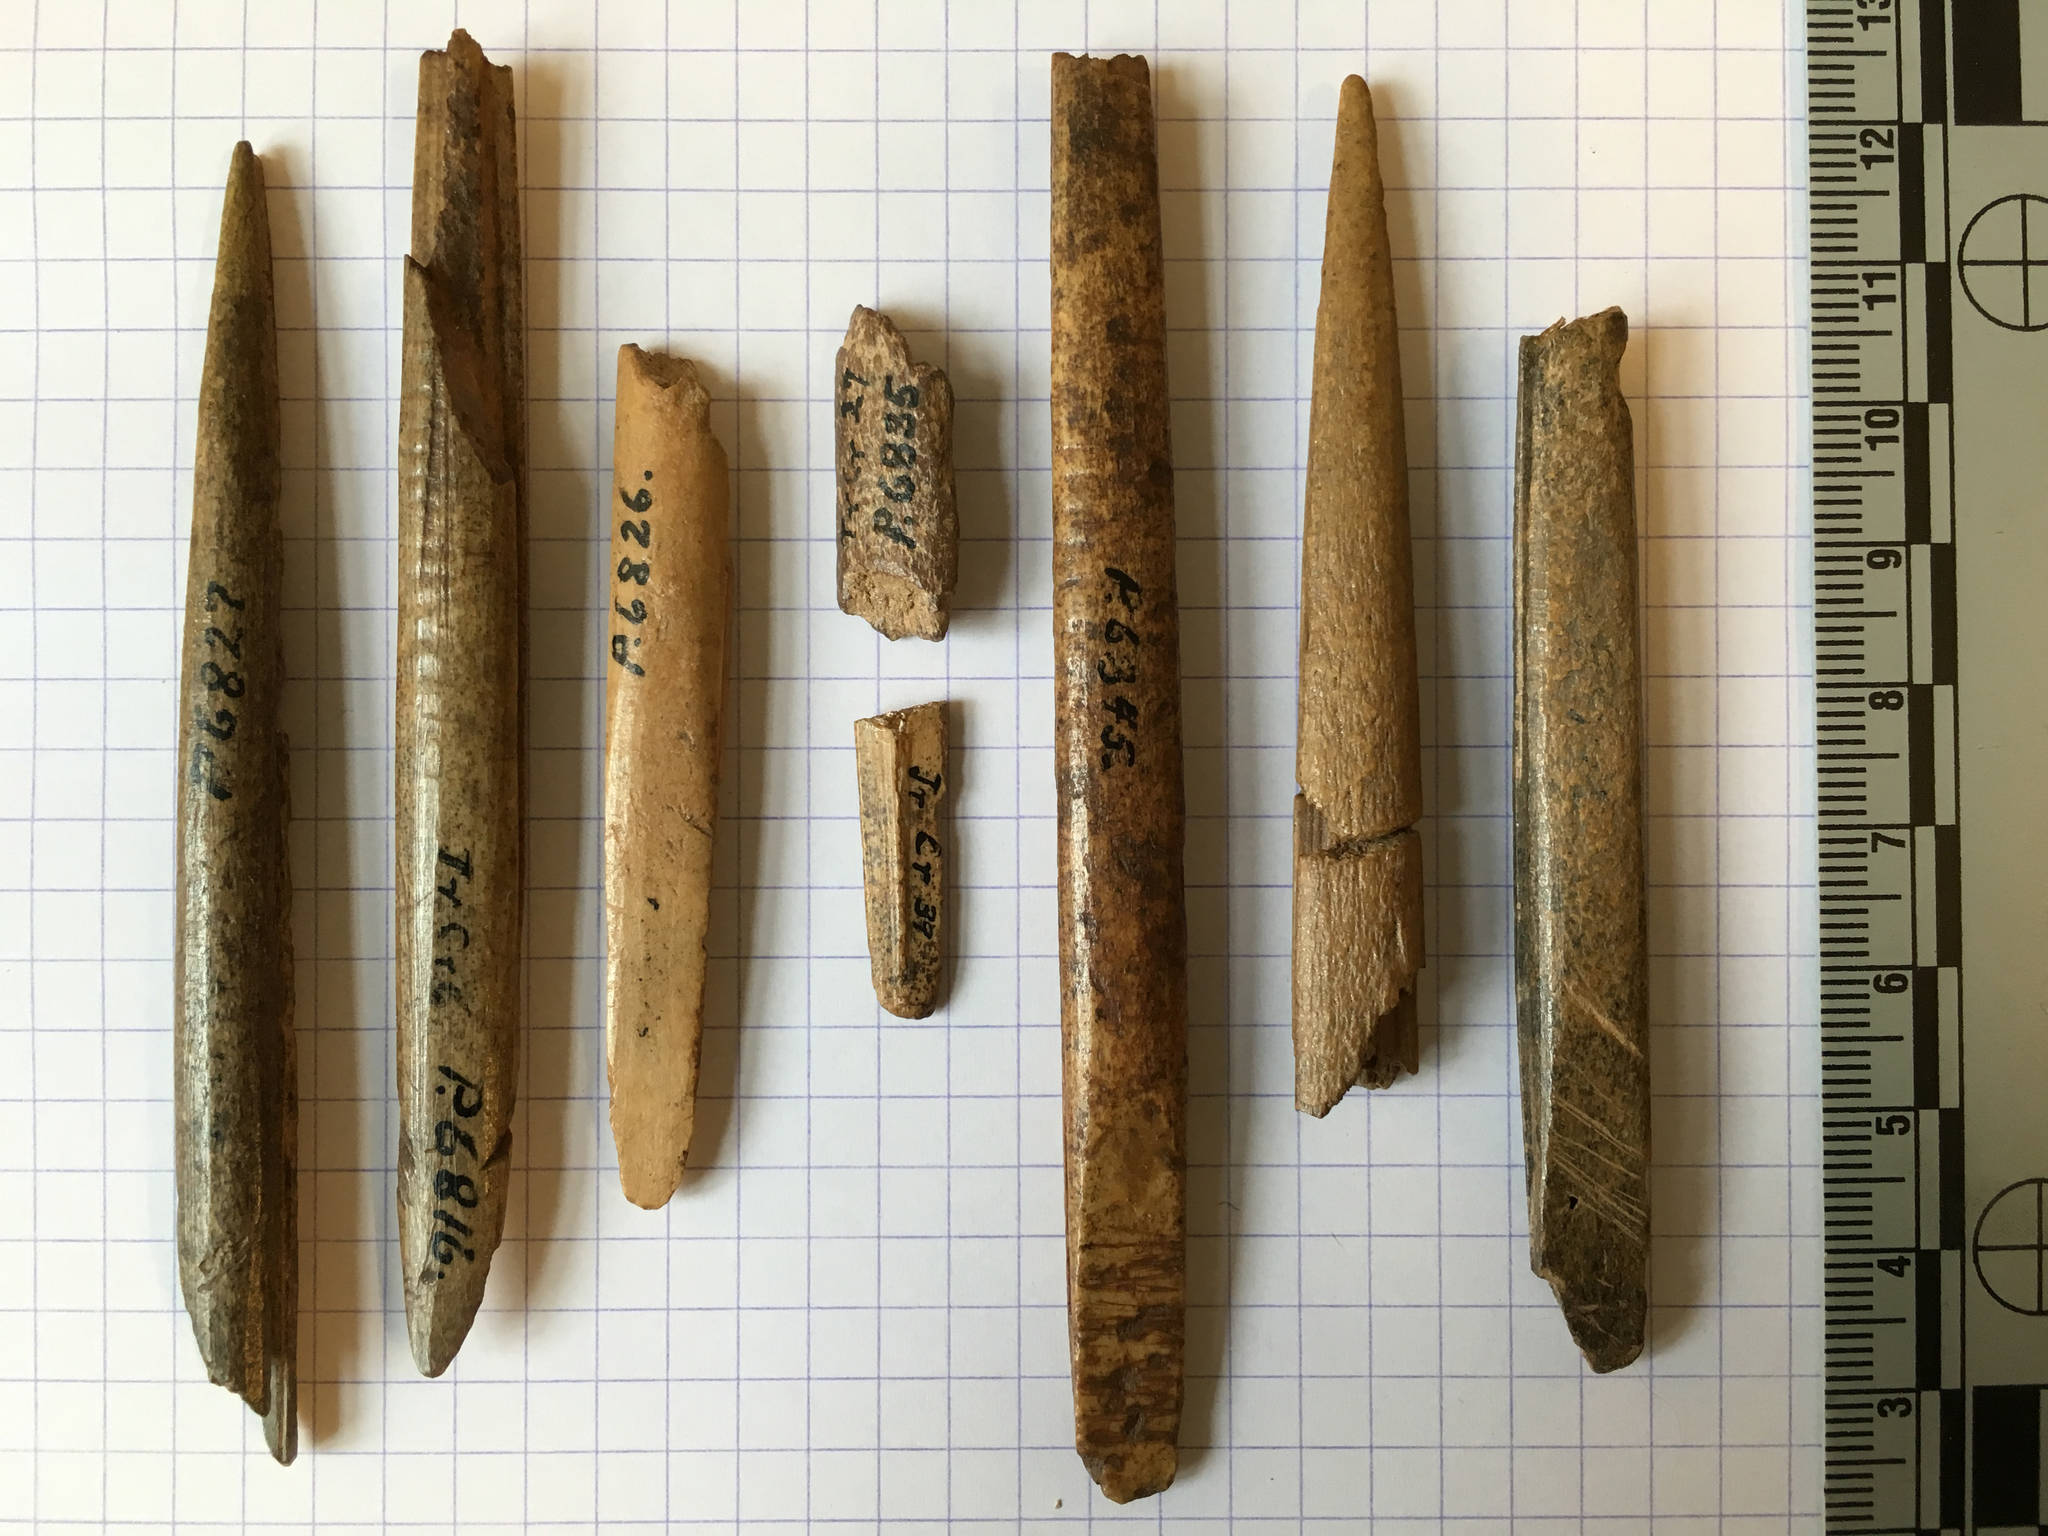 Artifact collections from Helge Larsen’s 1949-50 excavations housed at the Danish National Museum in Copenhagen. These antler weapon tips are the oldest artifacts from the site, dating to roughly 9,000 to 10,000 years ago and coincident with period of occupation that resulted in deposition of the tooth. (Courtesy Photo | Jeff Rasic/NPS)